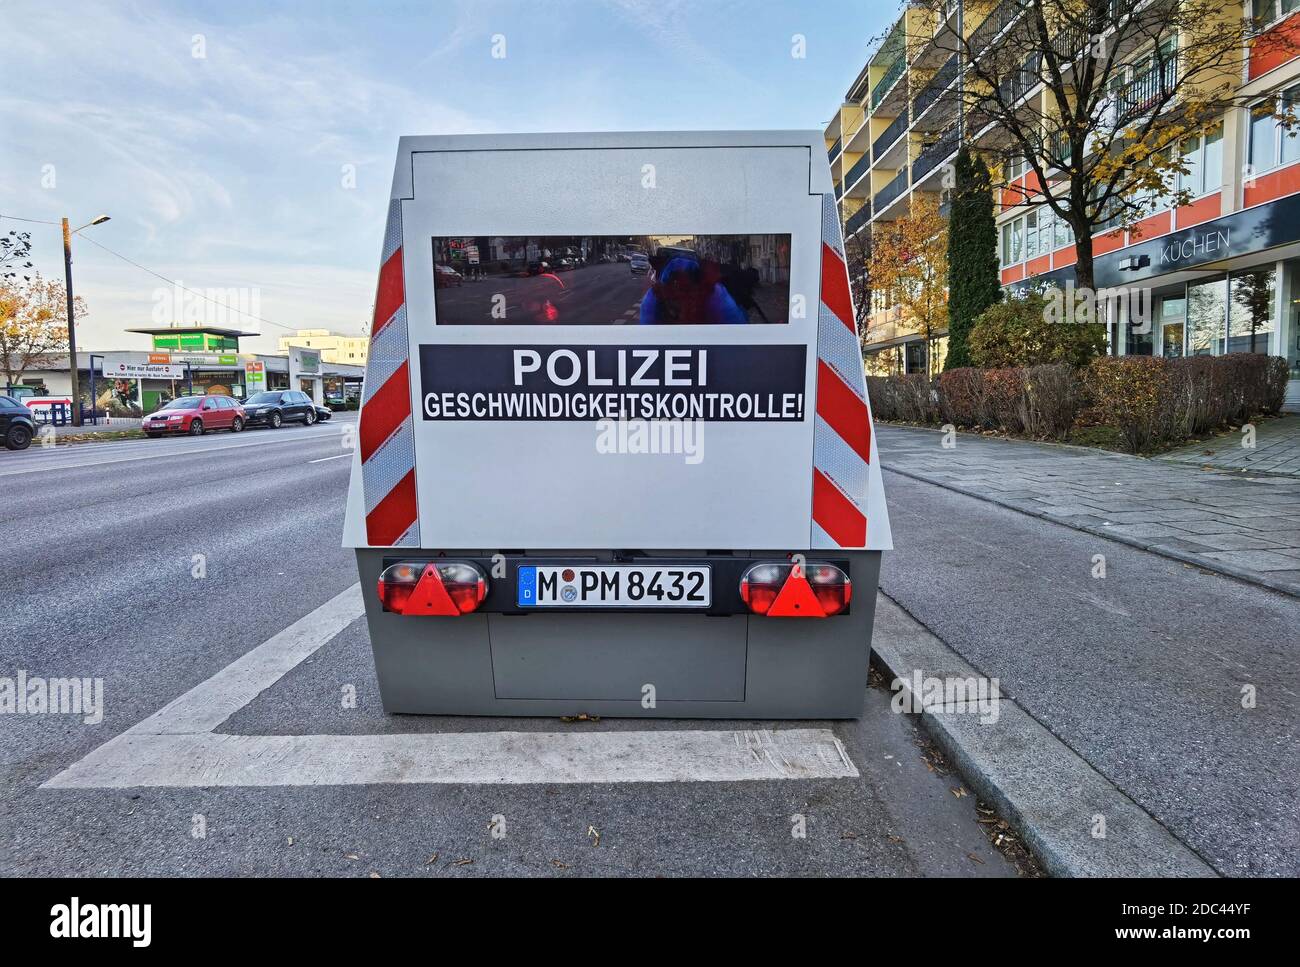 Munich, Bavaria, Germany. 18th Nov, 2020. An example of one of the newer  styles of autonomous speed camera trailers appearing in Munich, Germany.  Typically, the trailers are manufactured by companies such as